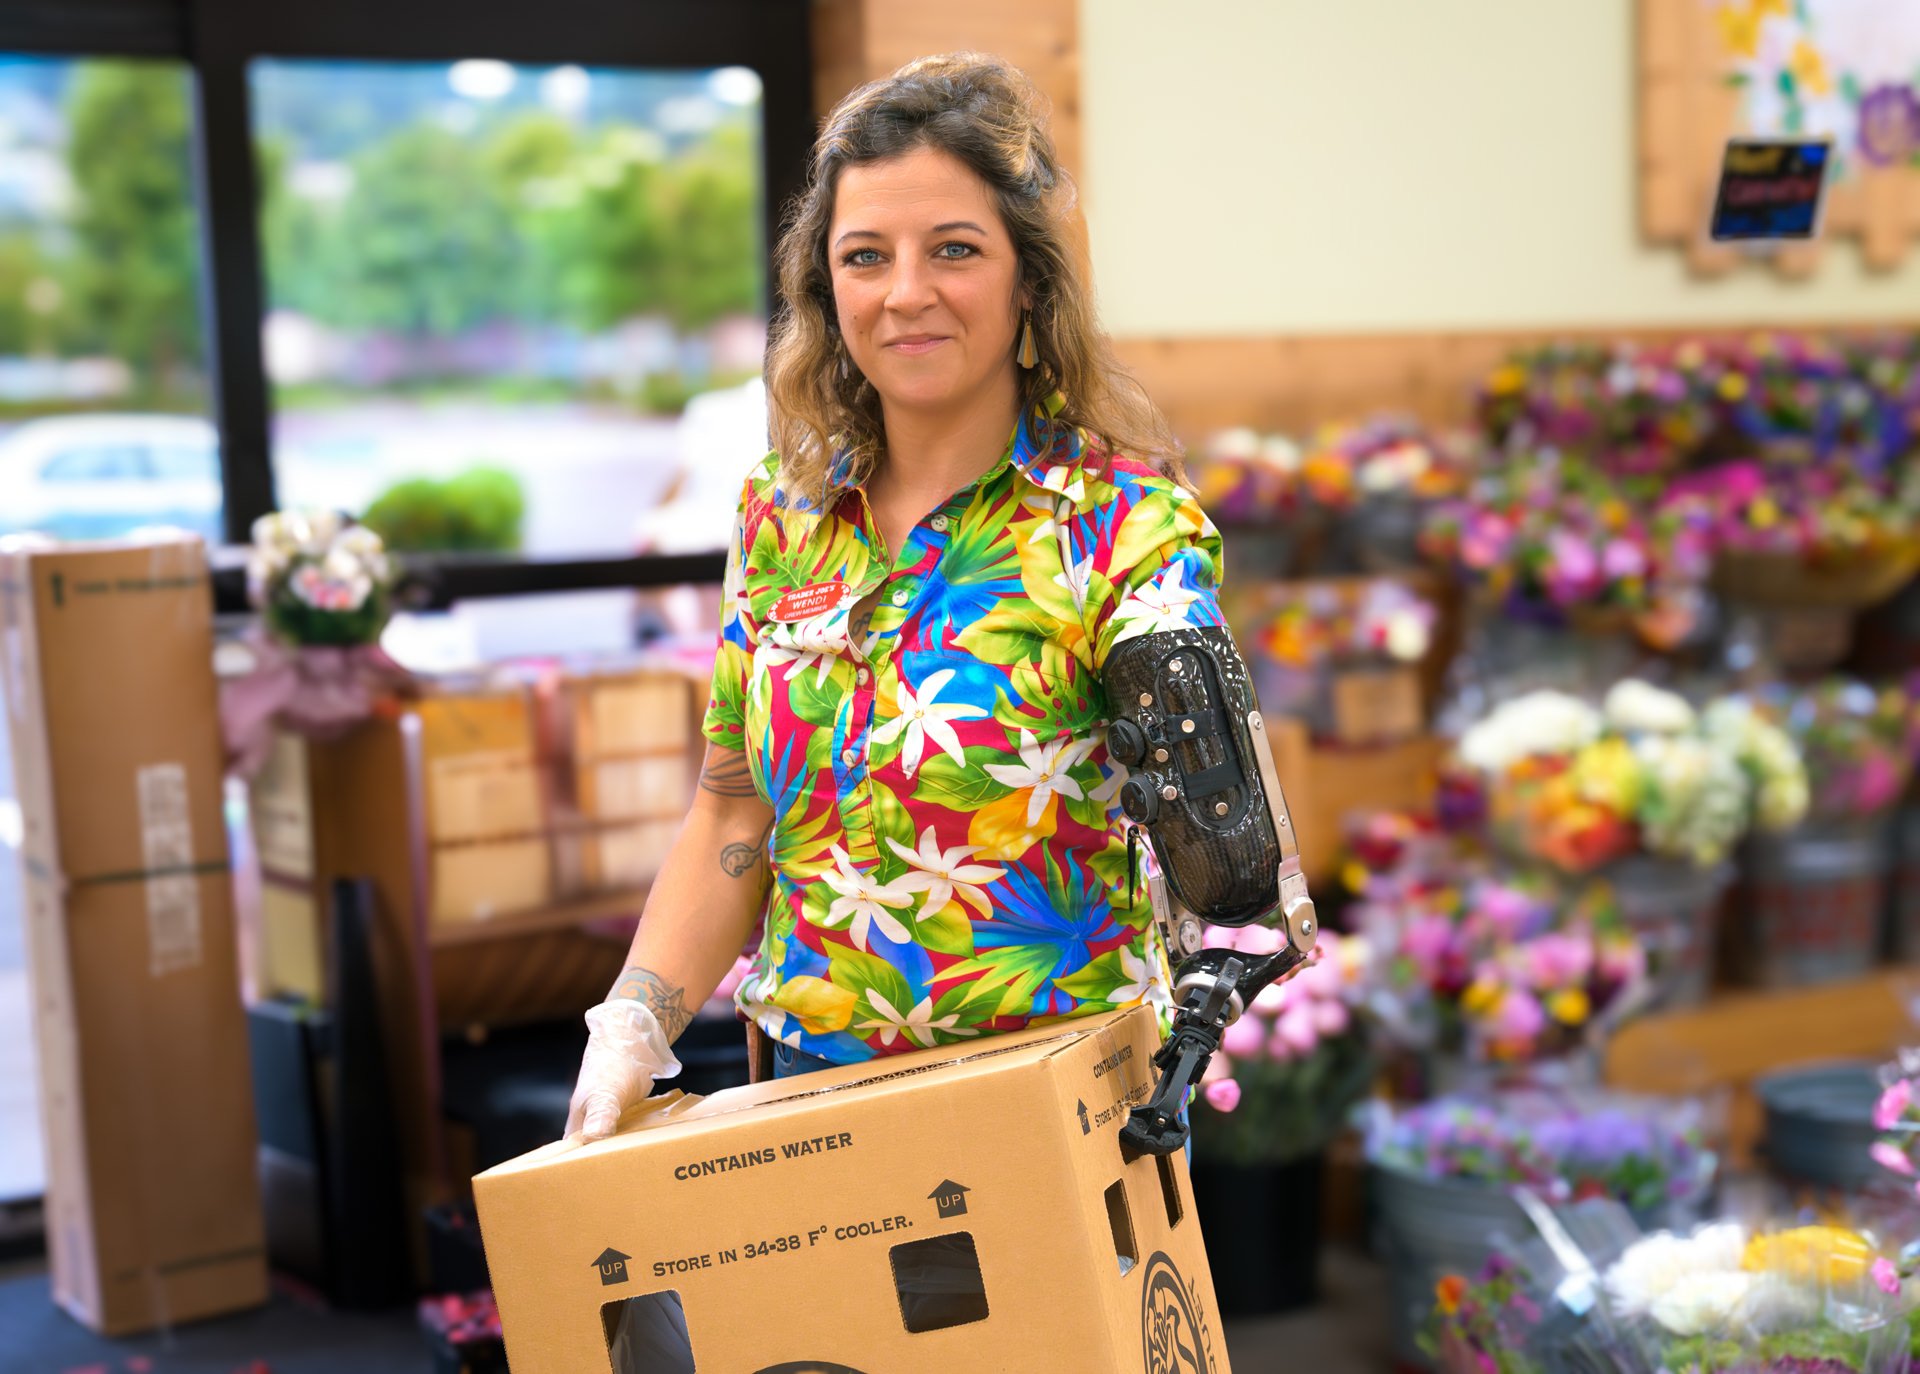 Wendi Parker Working at Trader Joe's with her custom transhumeral prosthesis